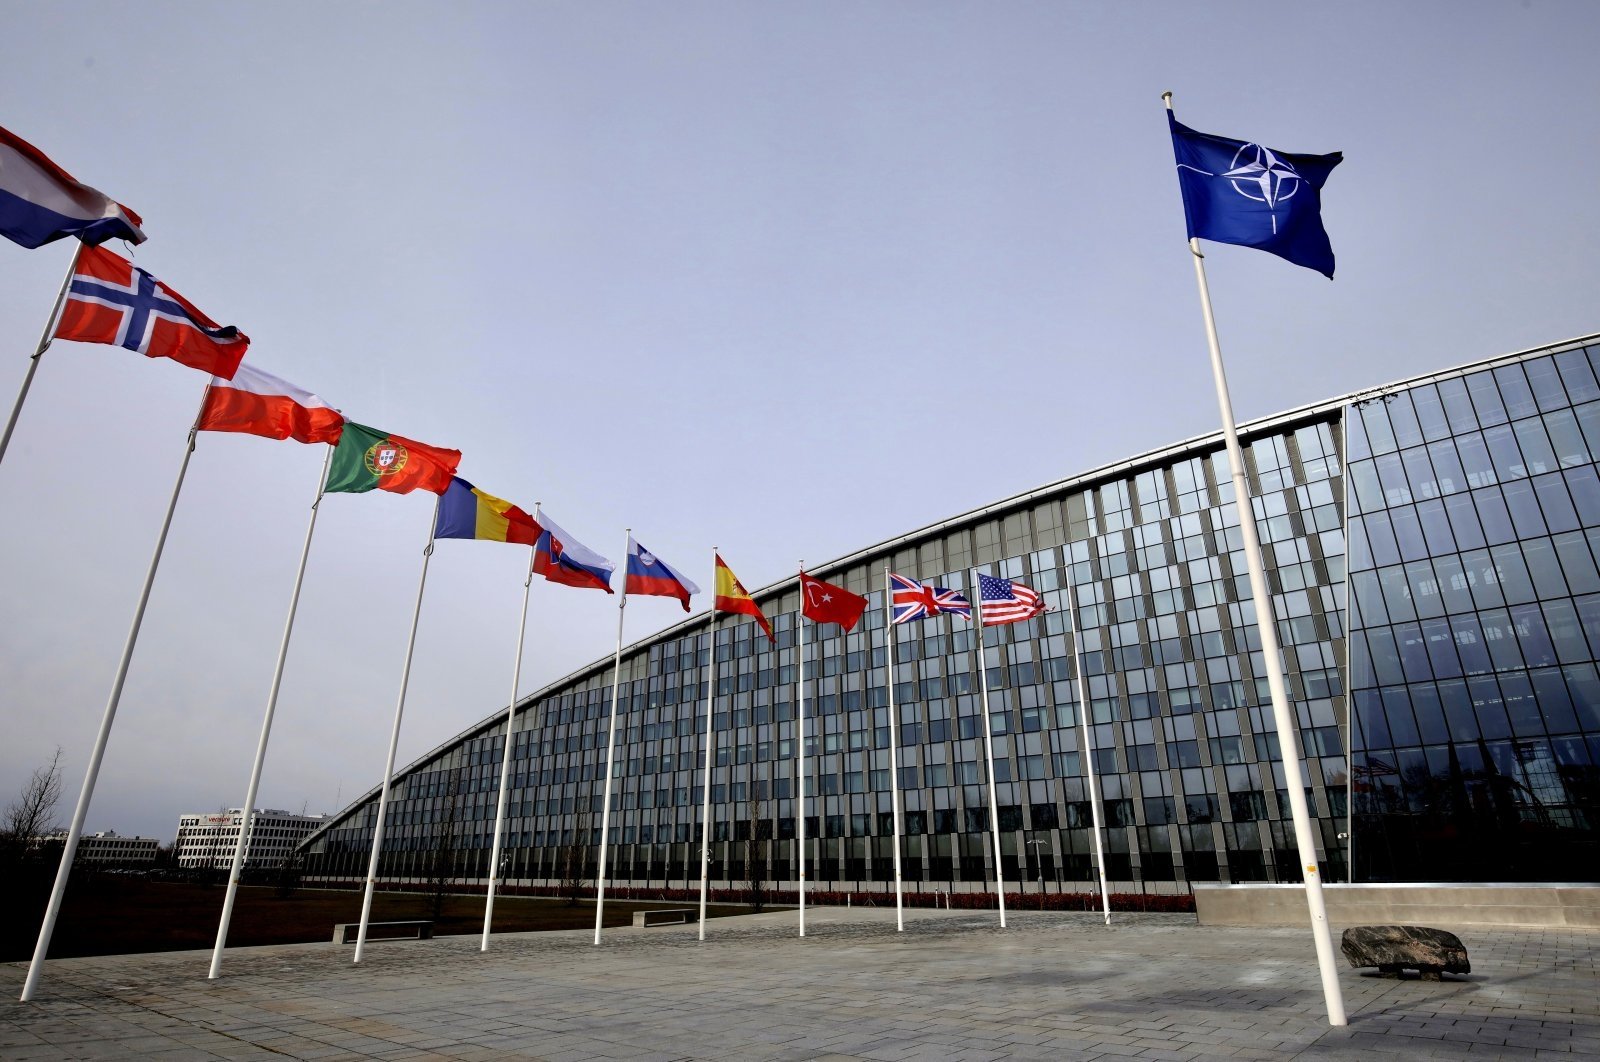 Flags of alliance members flap in the wind outside NATO headquarters in Brussels, Belgium, Feb. 28, 2020. (AP Photo)